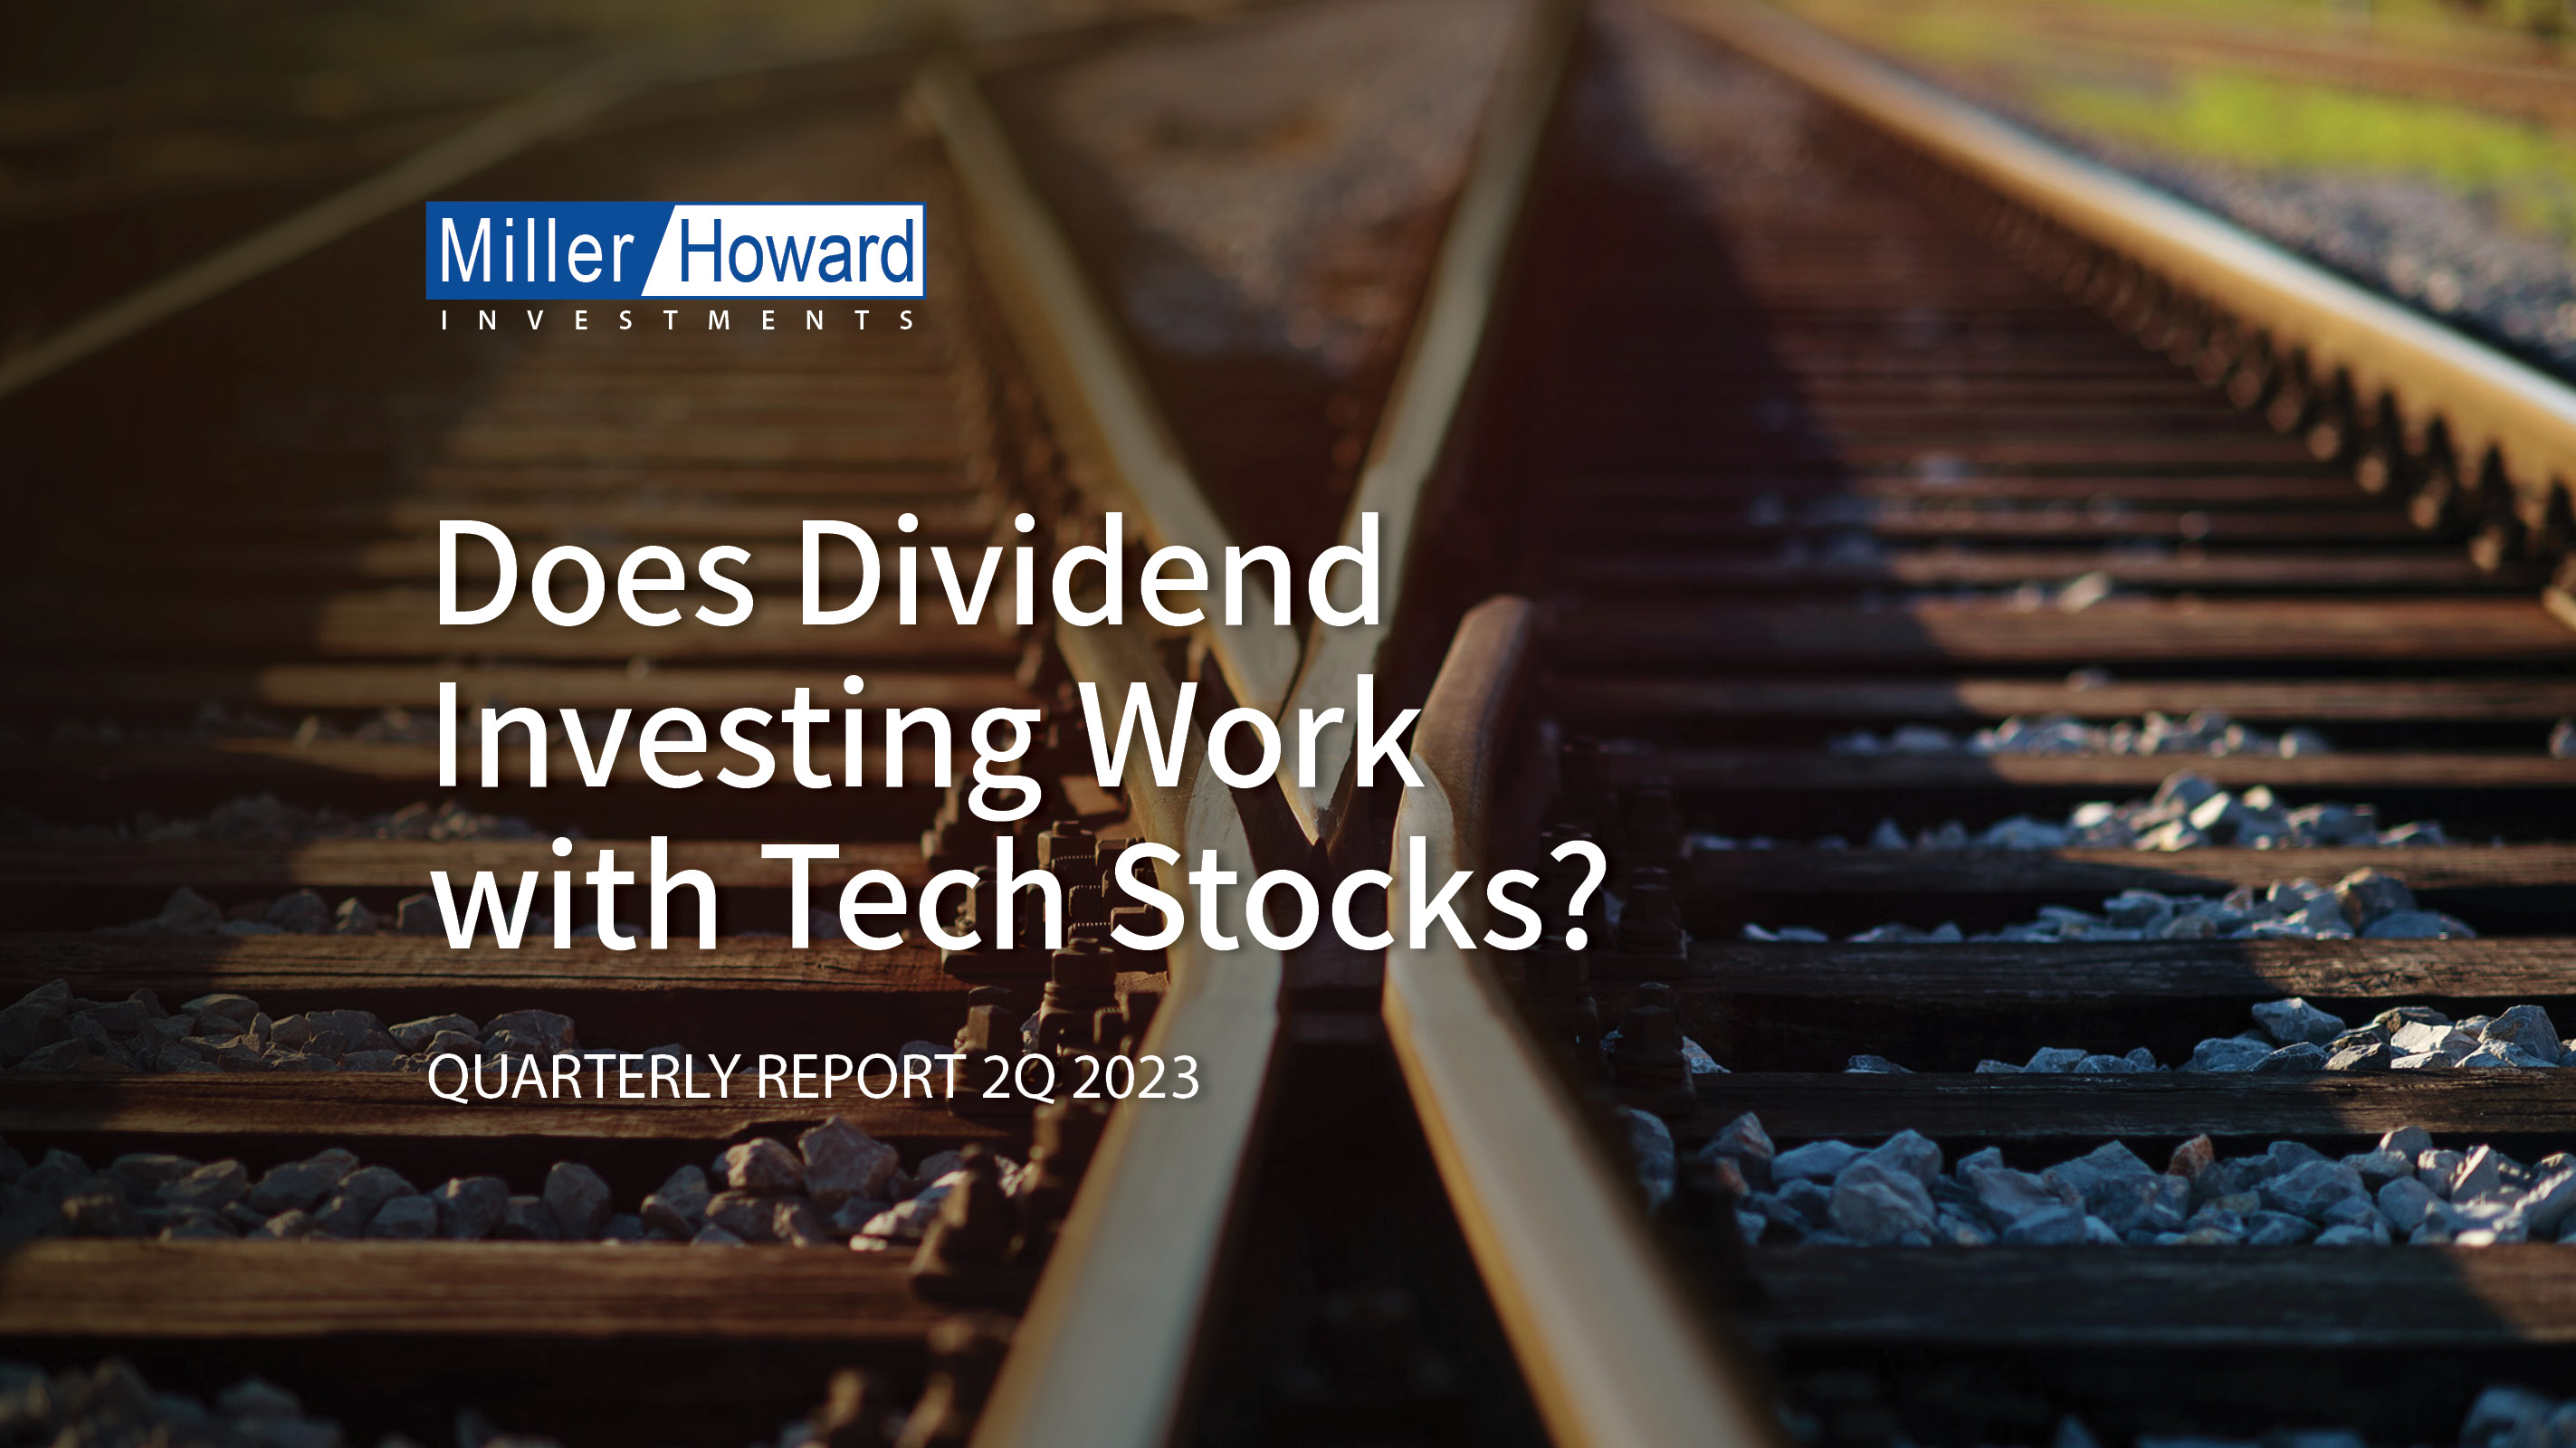 Does Dividend Investing Work with Tech Stocks?